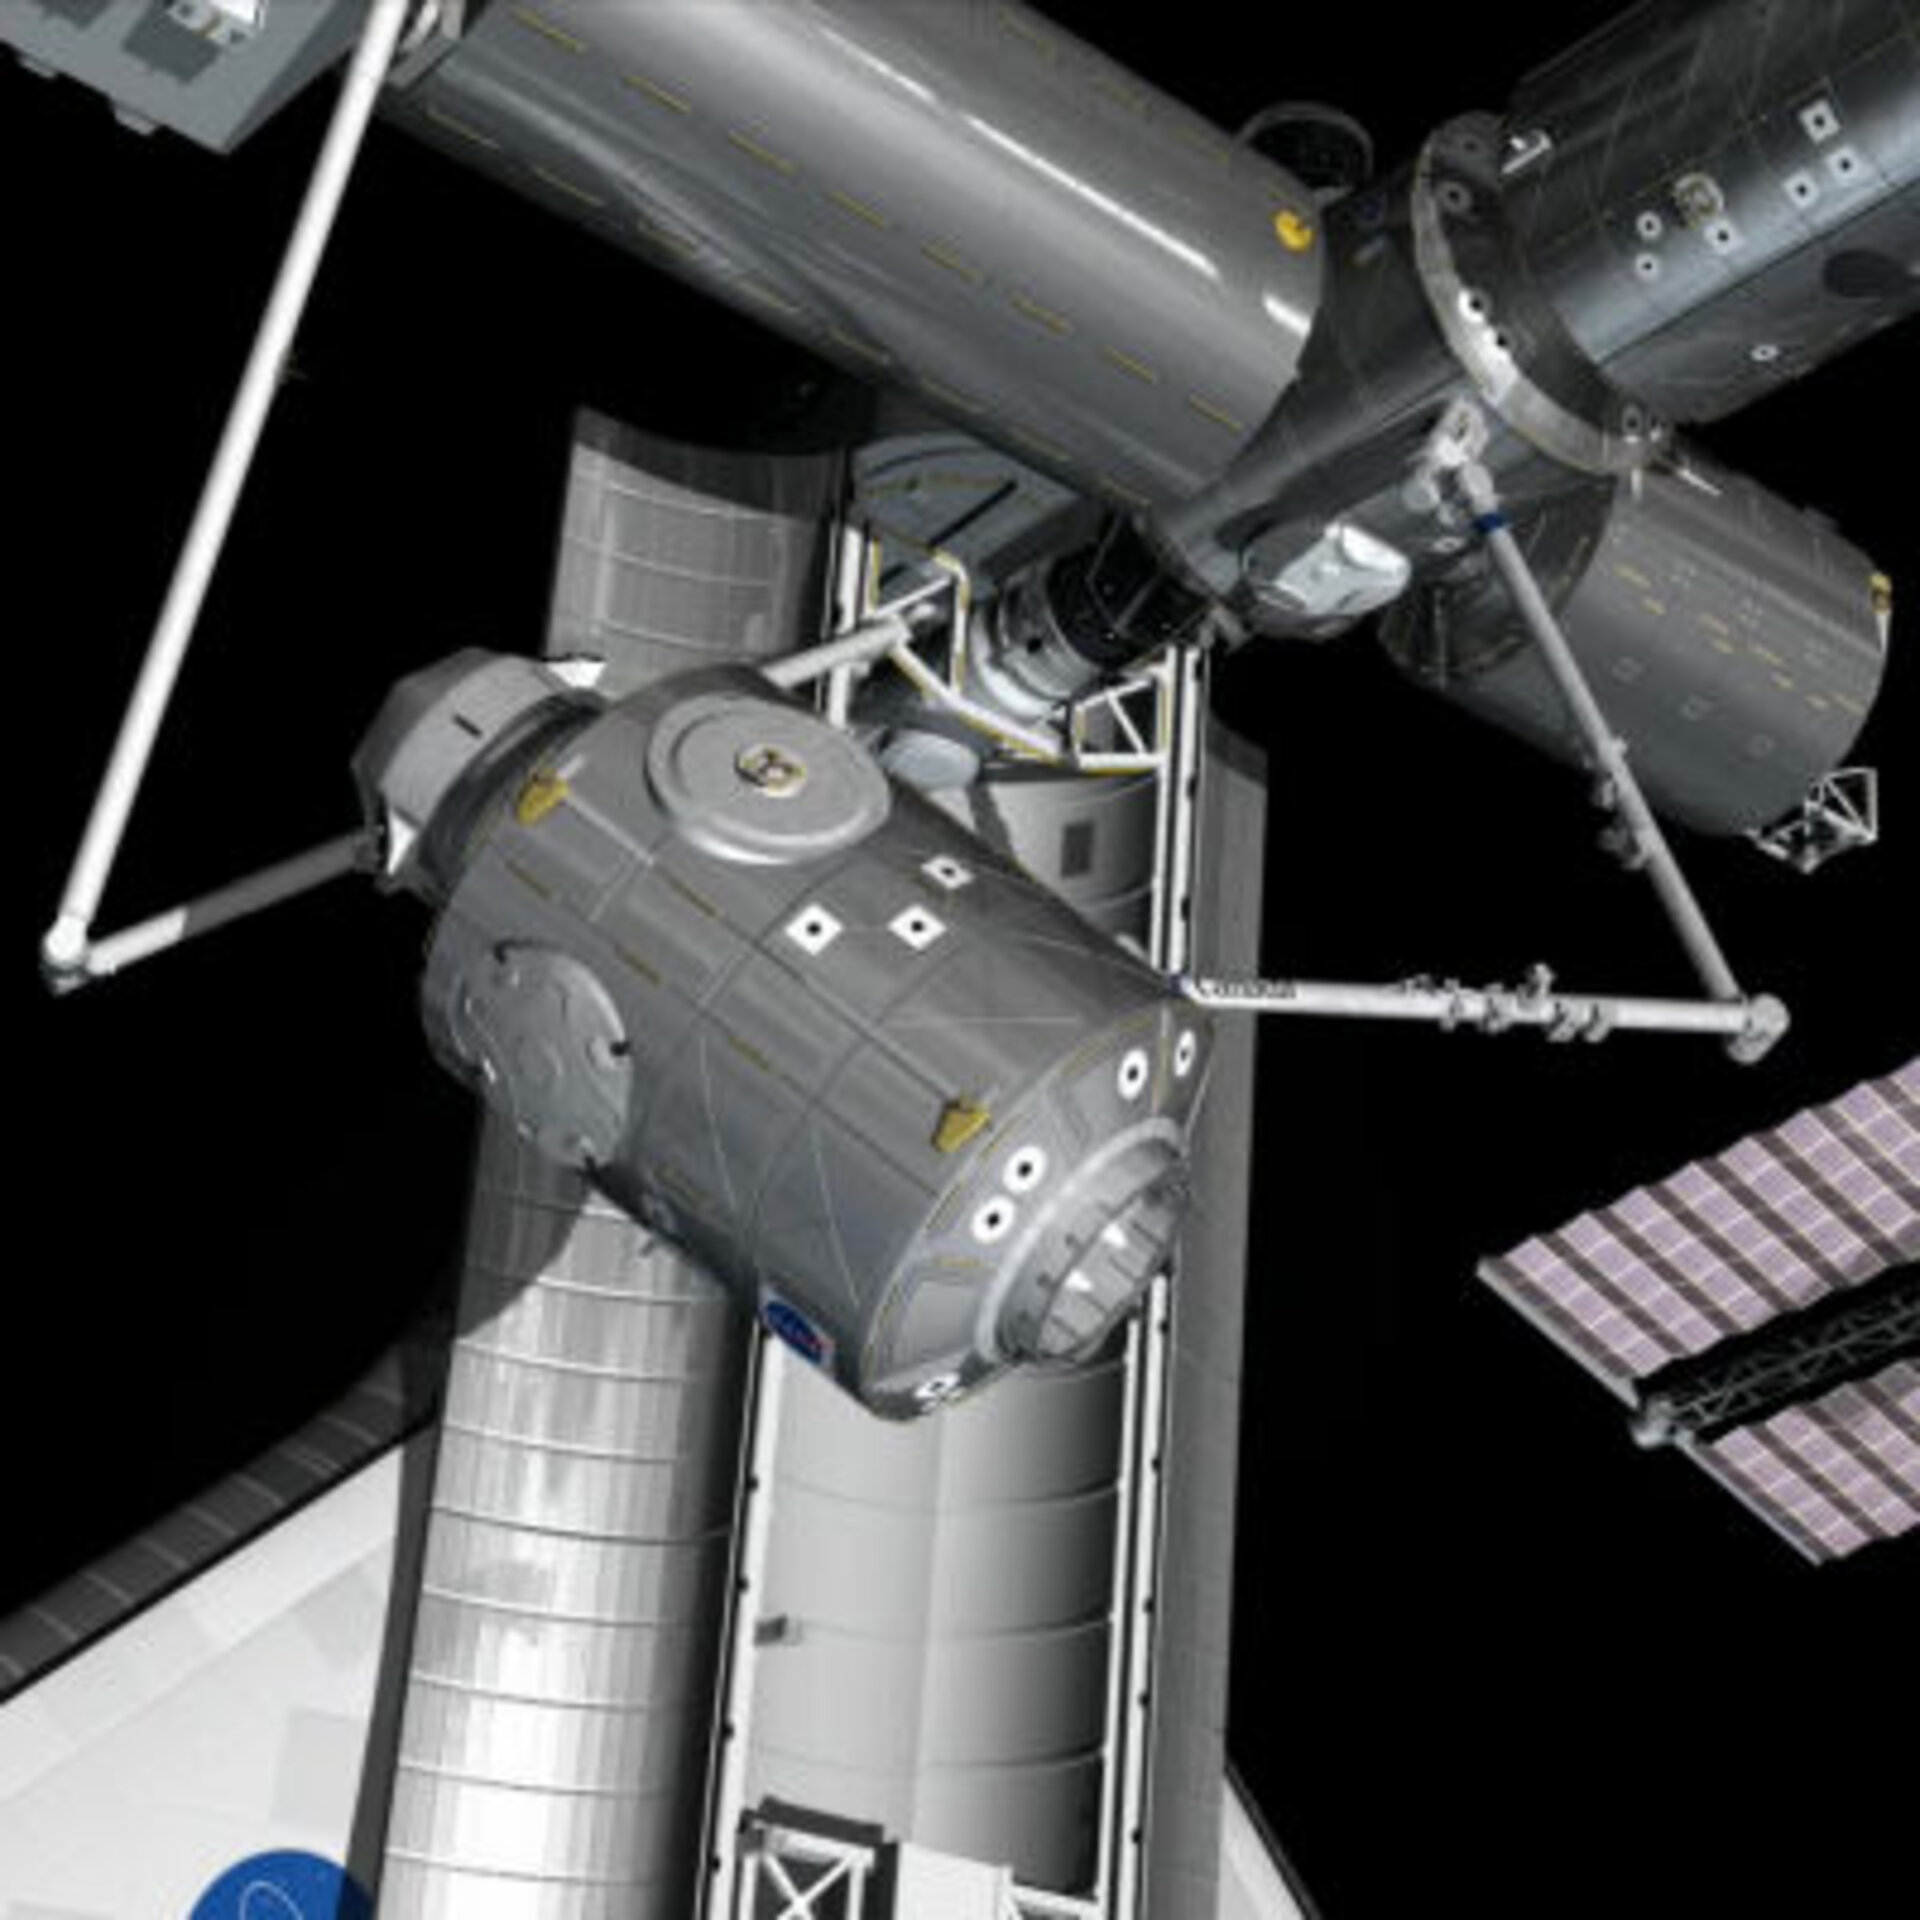 Node-3 is attached to ISS